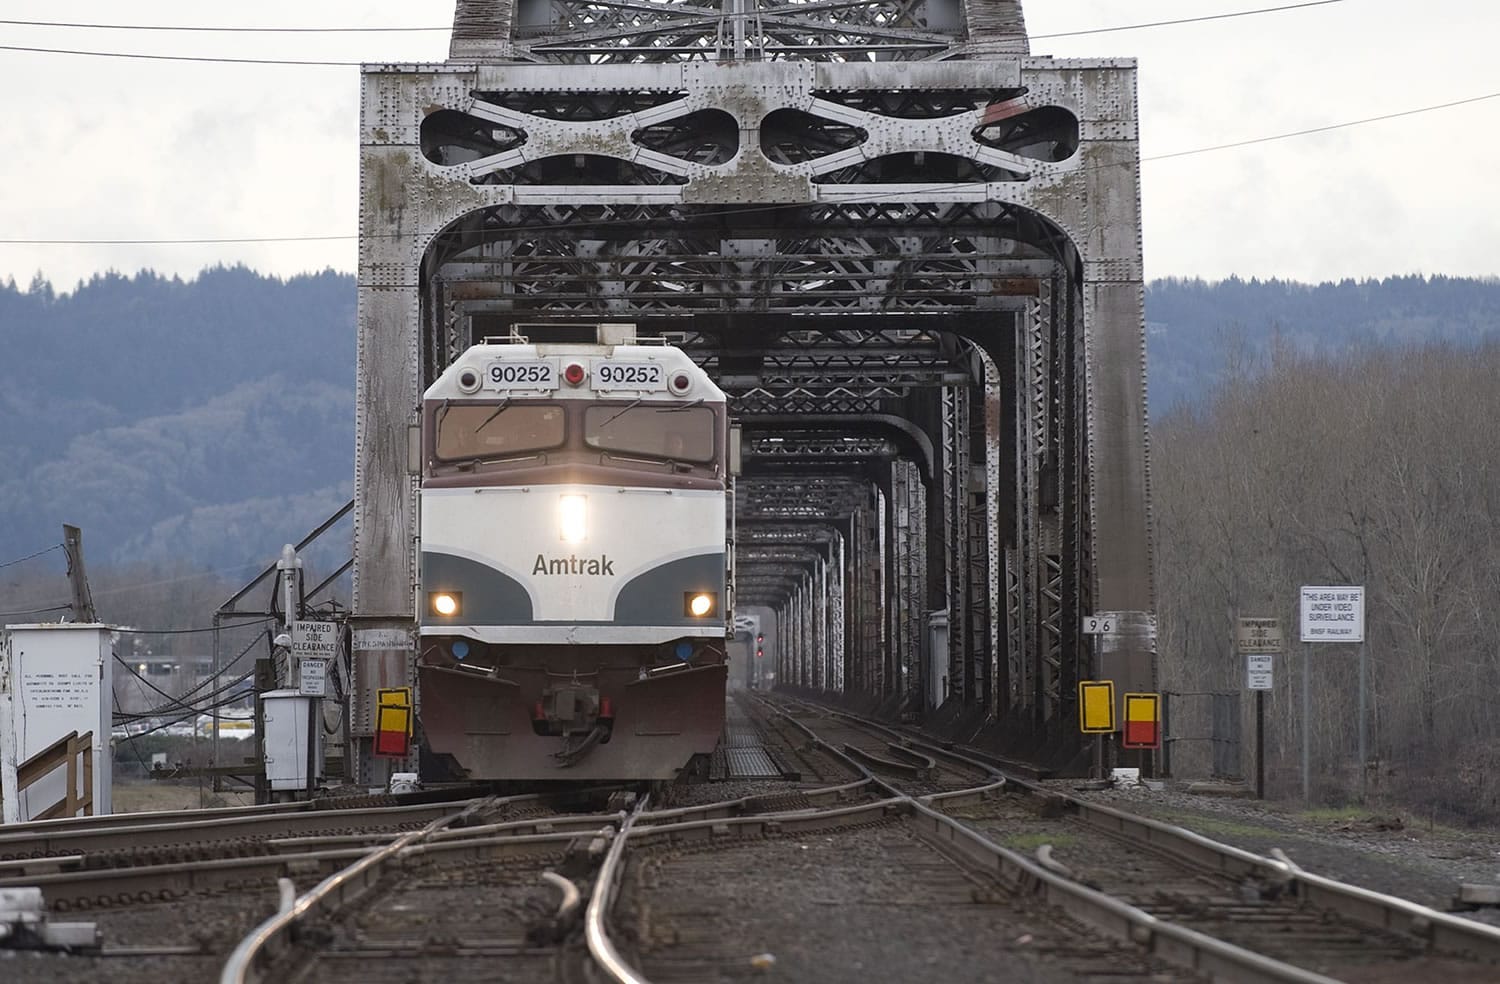 The northbound Amtrak Cascades train arrives at the Vancouver station in 2009.